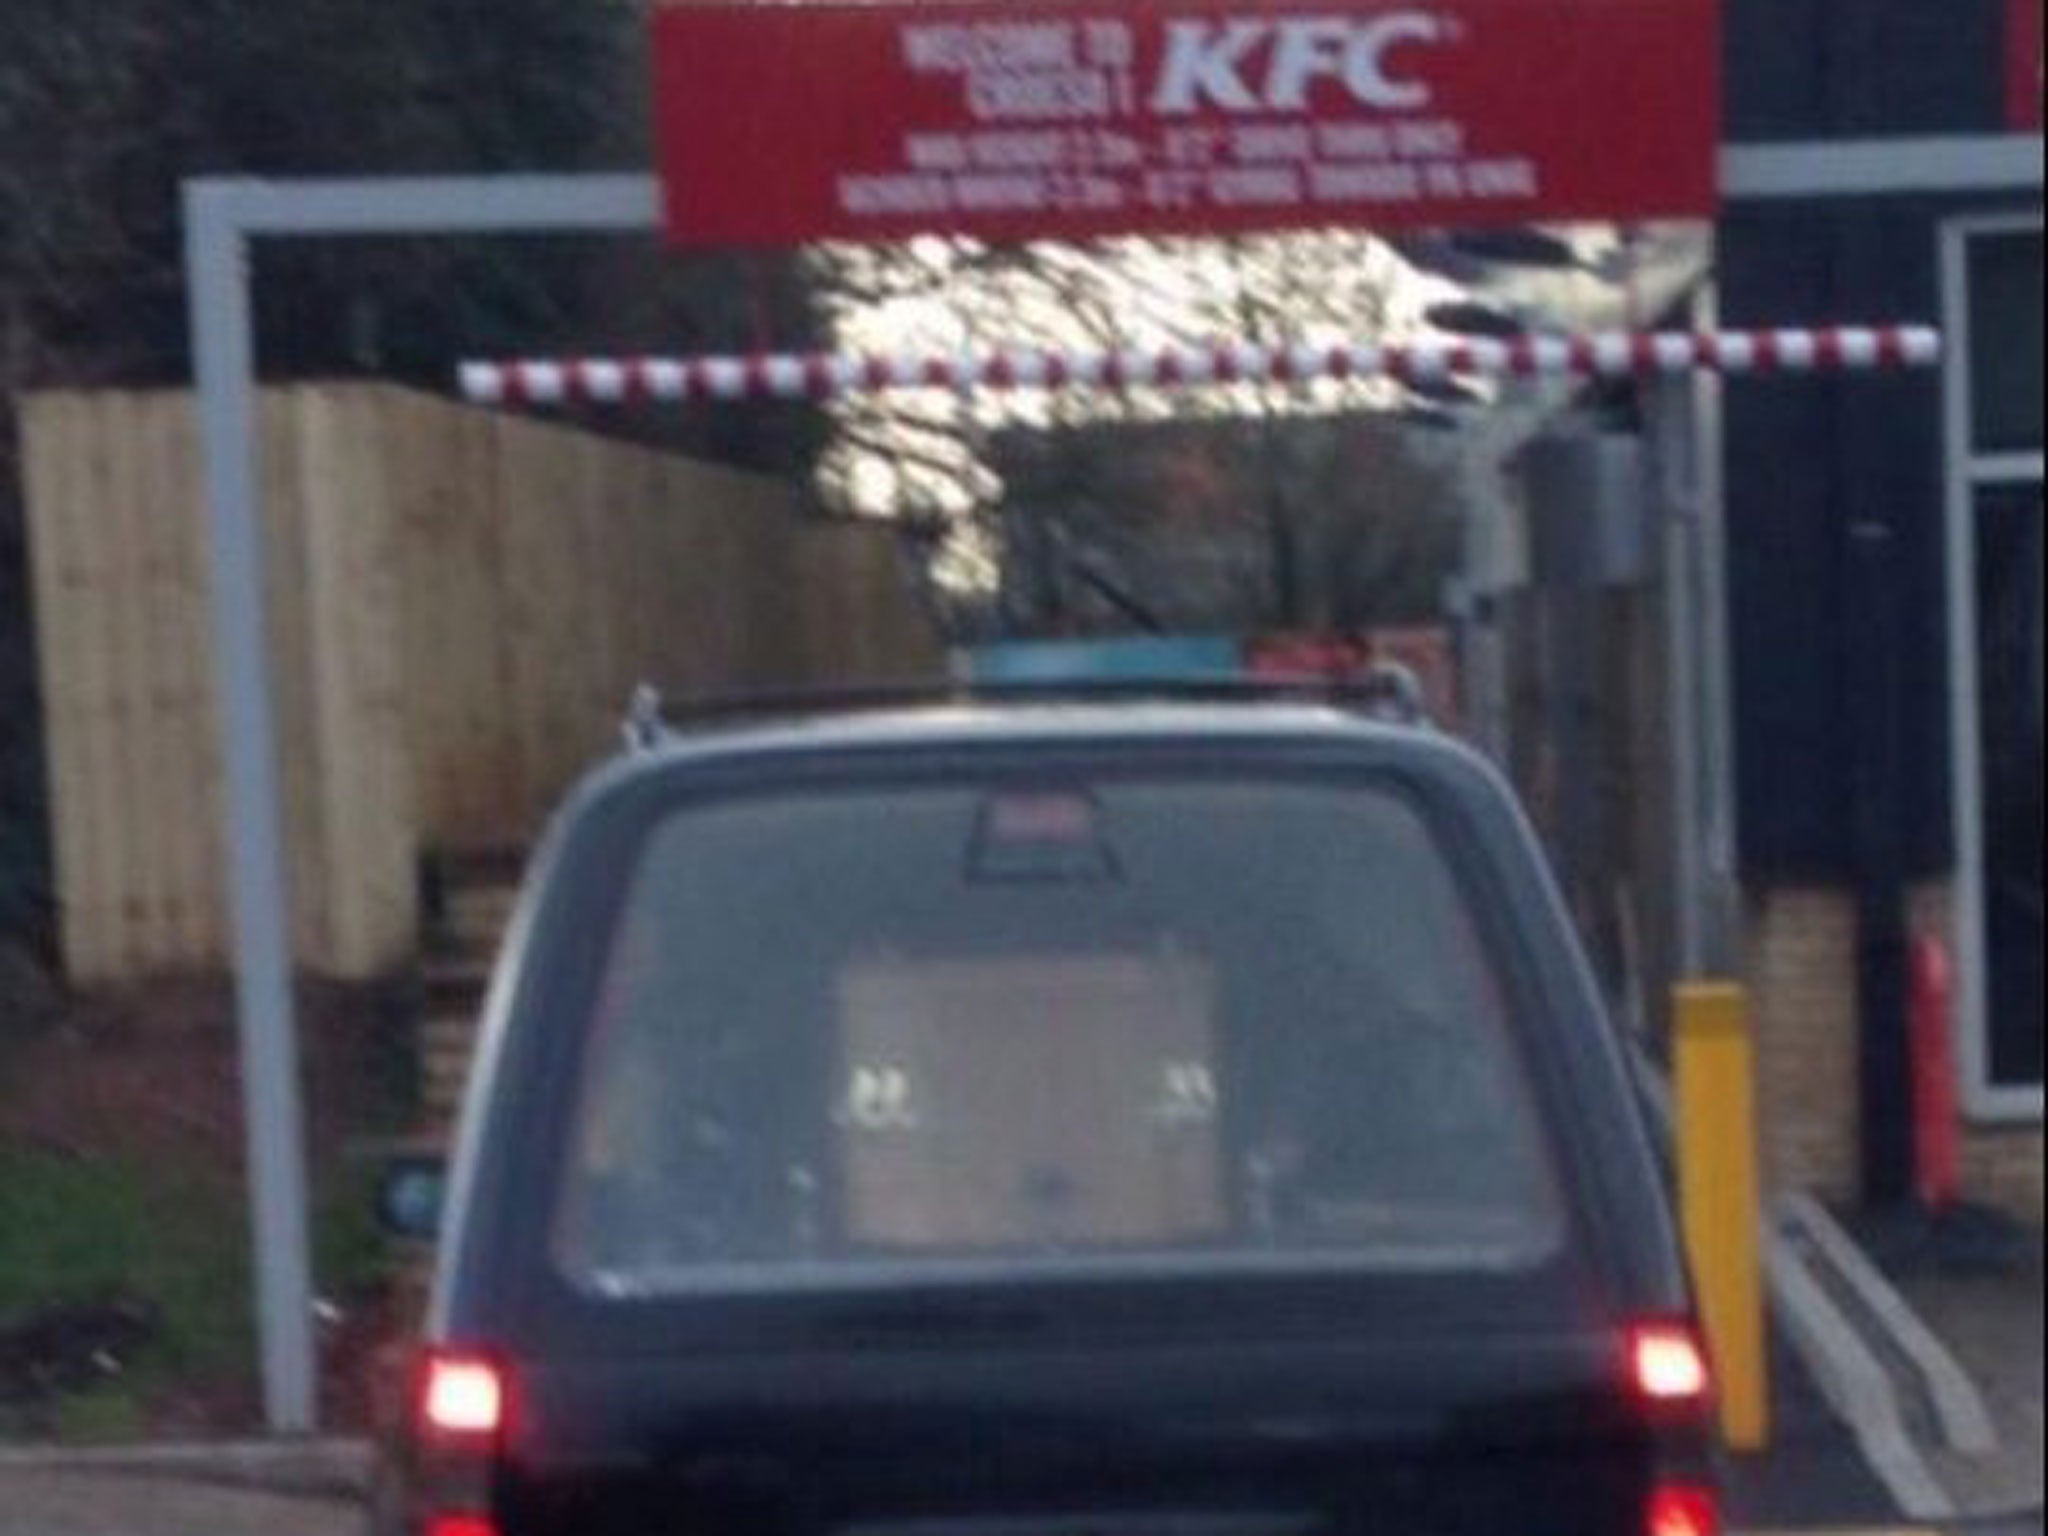 Twitter user Craig Davies claims to have taken this photo of a hearse at the drive-through of a fast-food restaurant